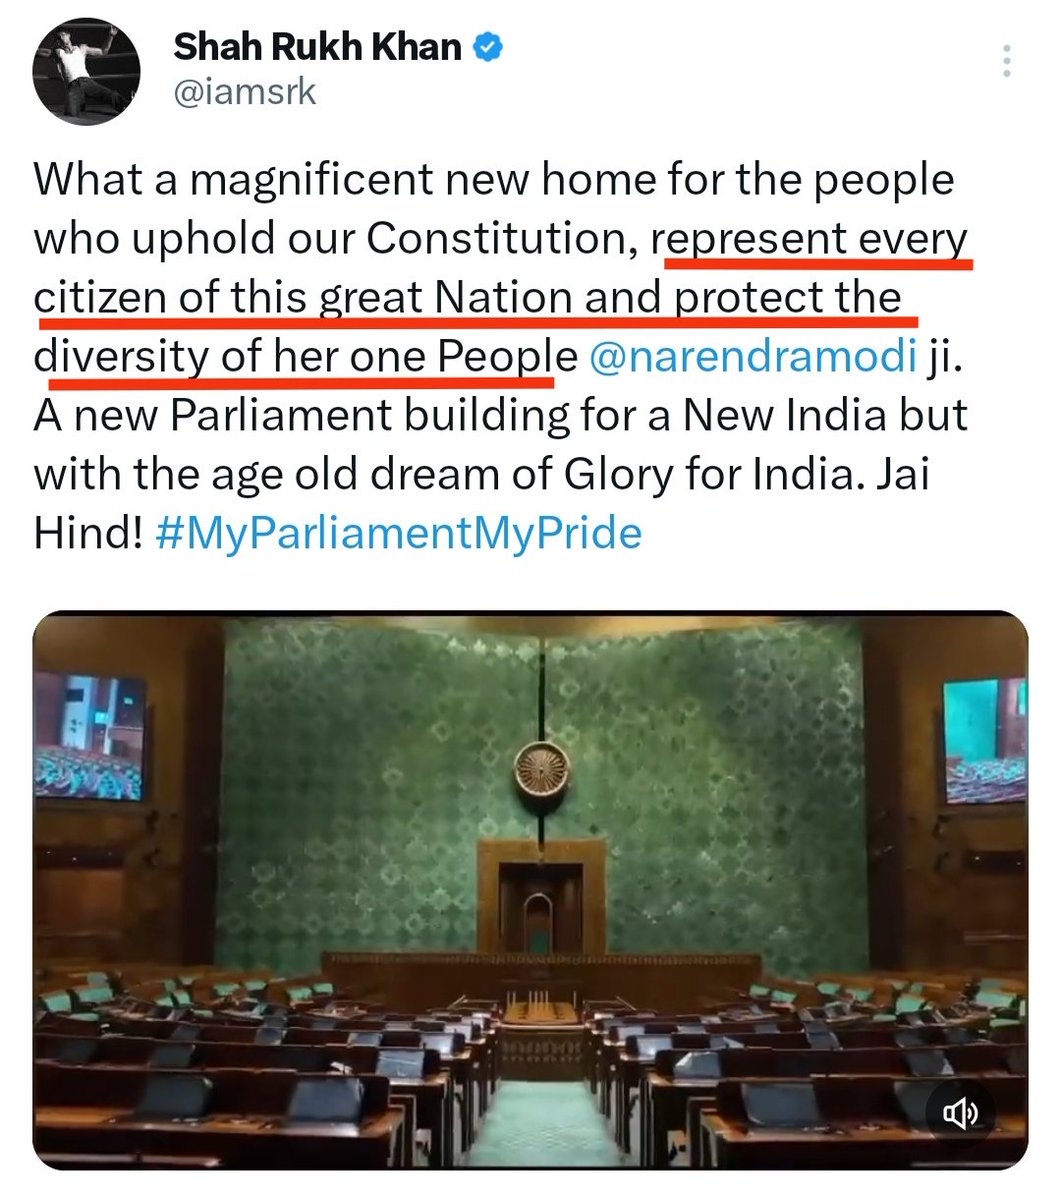 No @iamsrk this isn't my parliament nor pride as majoritarian supremacism is written all over in its consecration. Your grandfather was Subhas C Bose's fellow traveller in his arduous overseas journey. My grandfather shared prison space with Bose. But my spine isn't brittle yet.